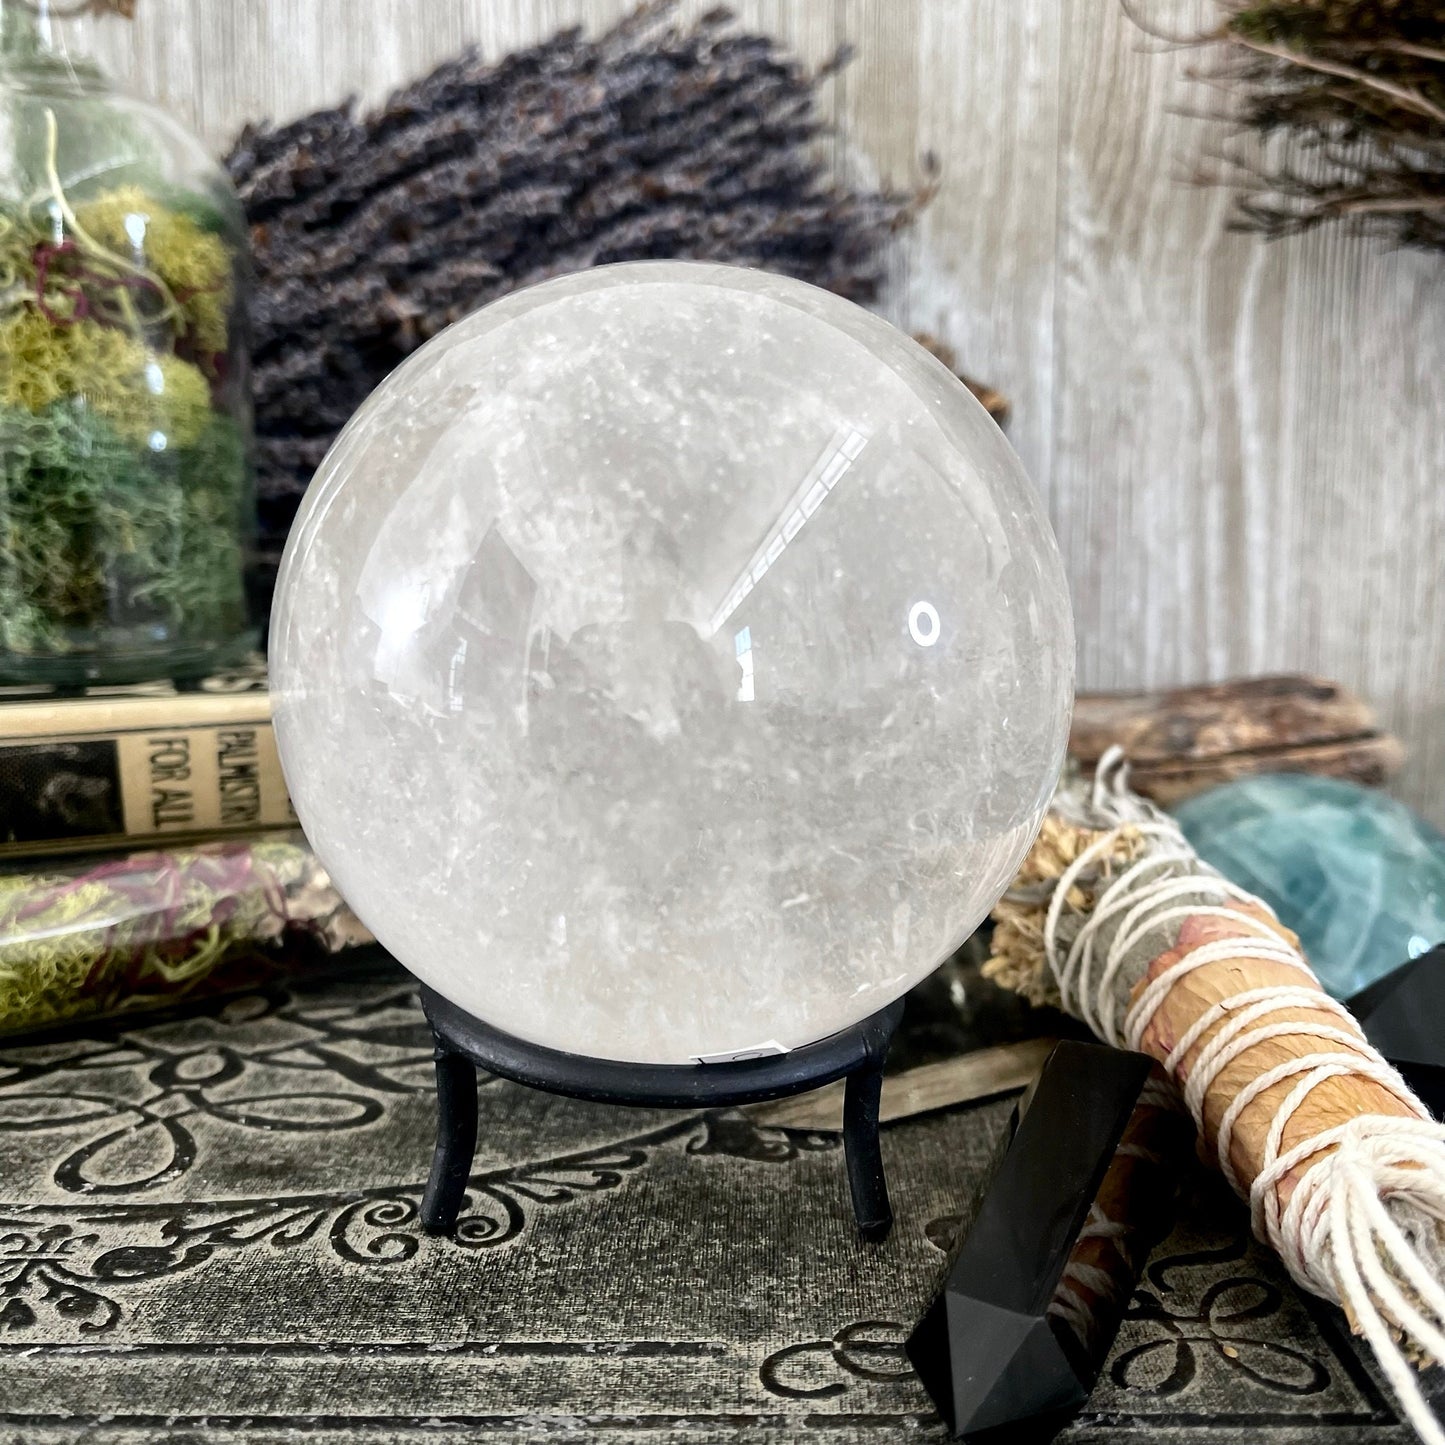 Large Clear Quartz Crystal Ball / FoxlarkCrystals / Crystal Sphere Home Decor Wiccan Pagan Spells Rituals Magic Scrying Orb Metaphysical